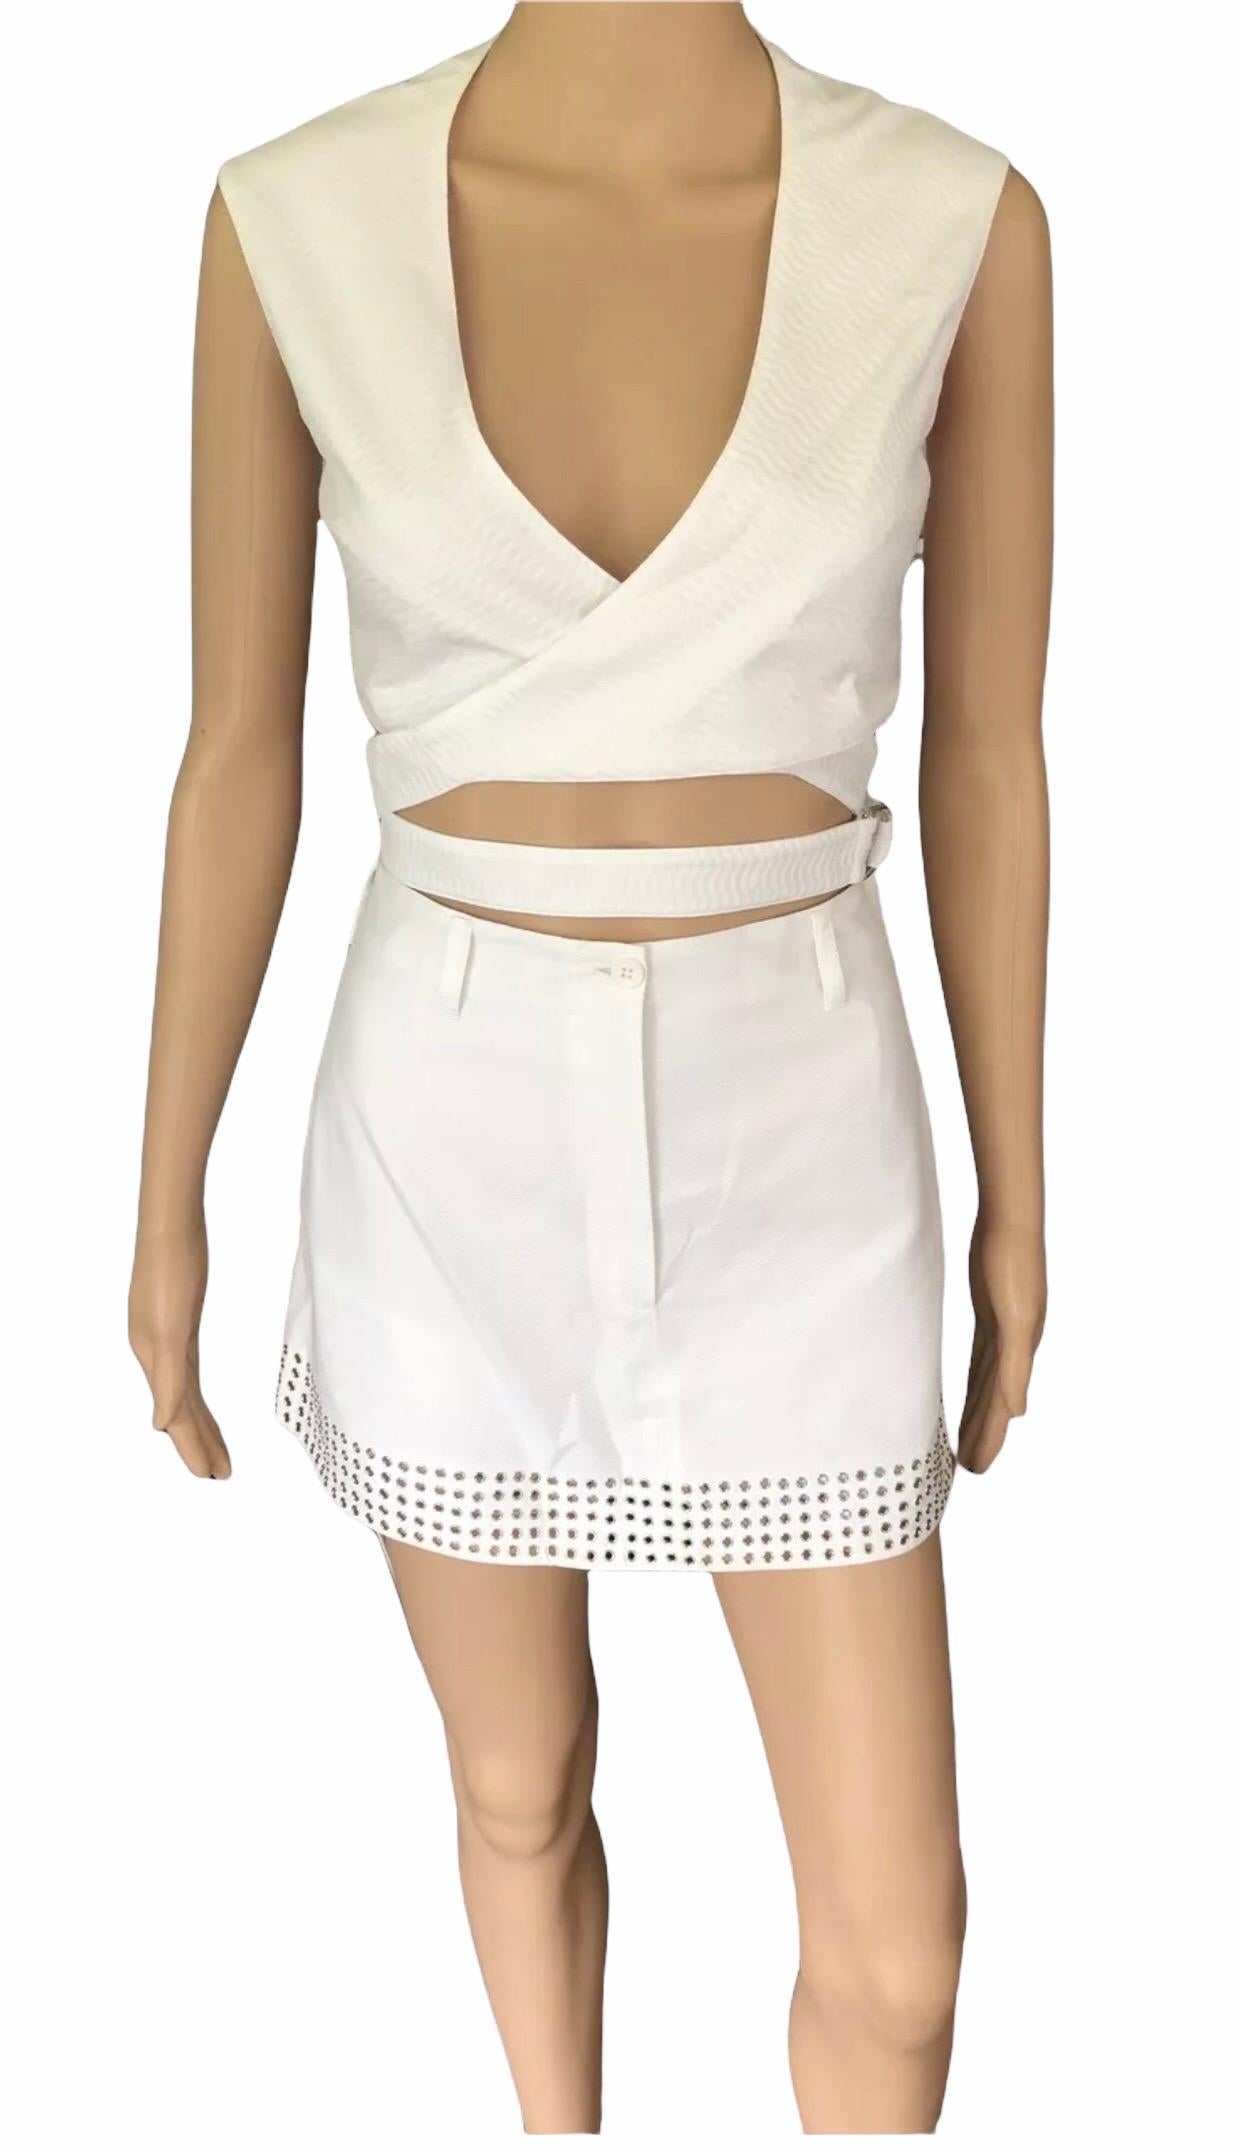 New with Tags Azzedine Alaia Embellished White Shorts and Bra Top 2 Piece Set

All Eyes on Alaïa

For the last half-century, the world’s most fashionable and adventuresome women have turned to Azzedine Alaïa for body-enhancing clothes that give them